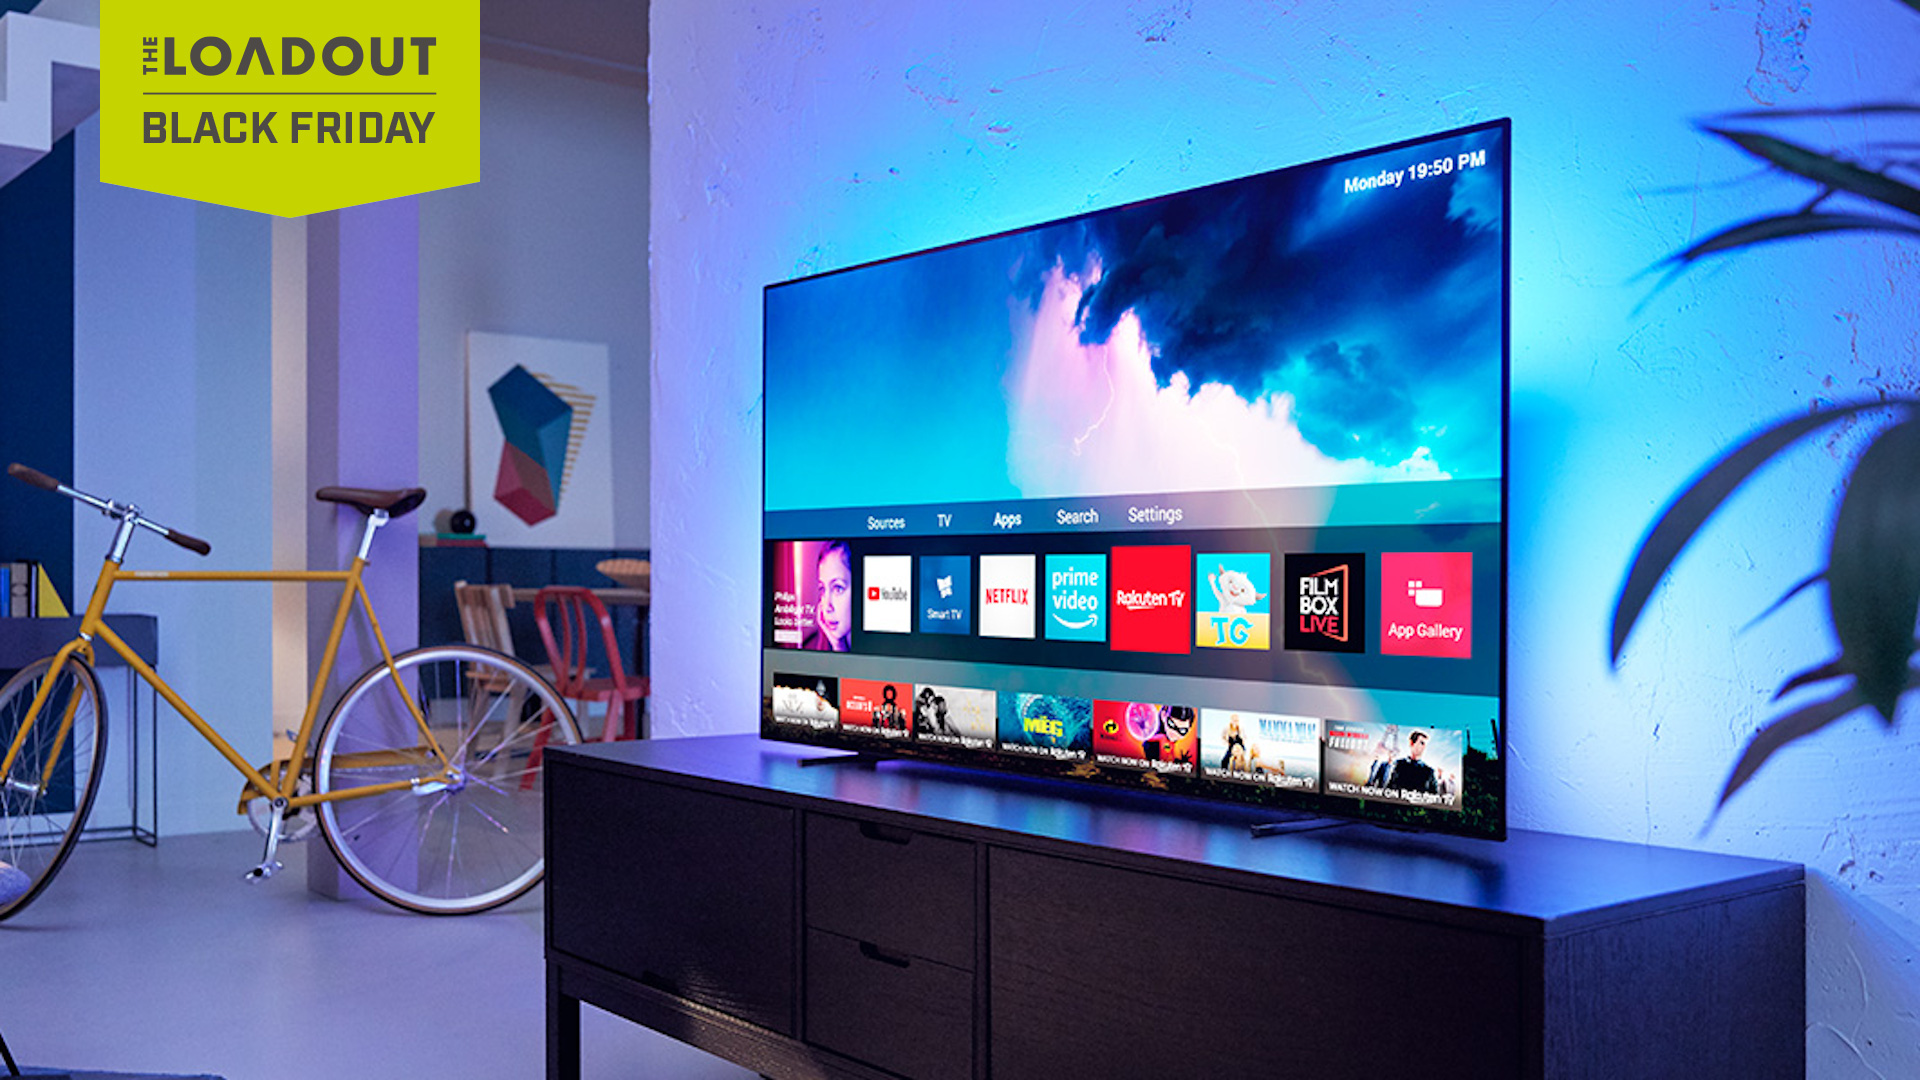 Early Black Friday deals are coming in hot for 4K TVs | The Loadout